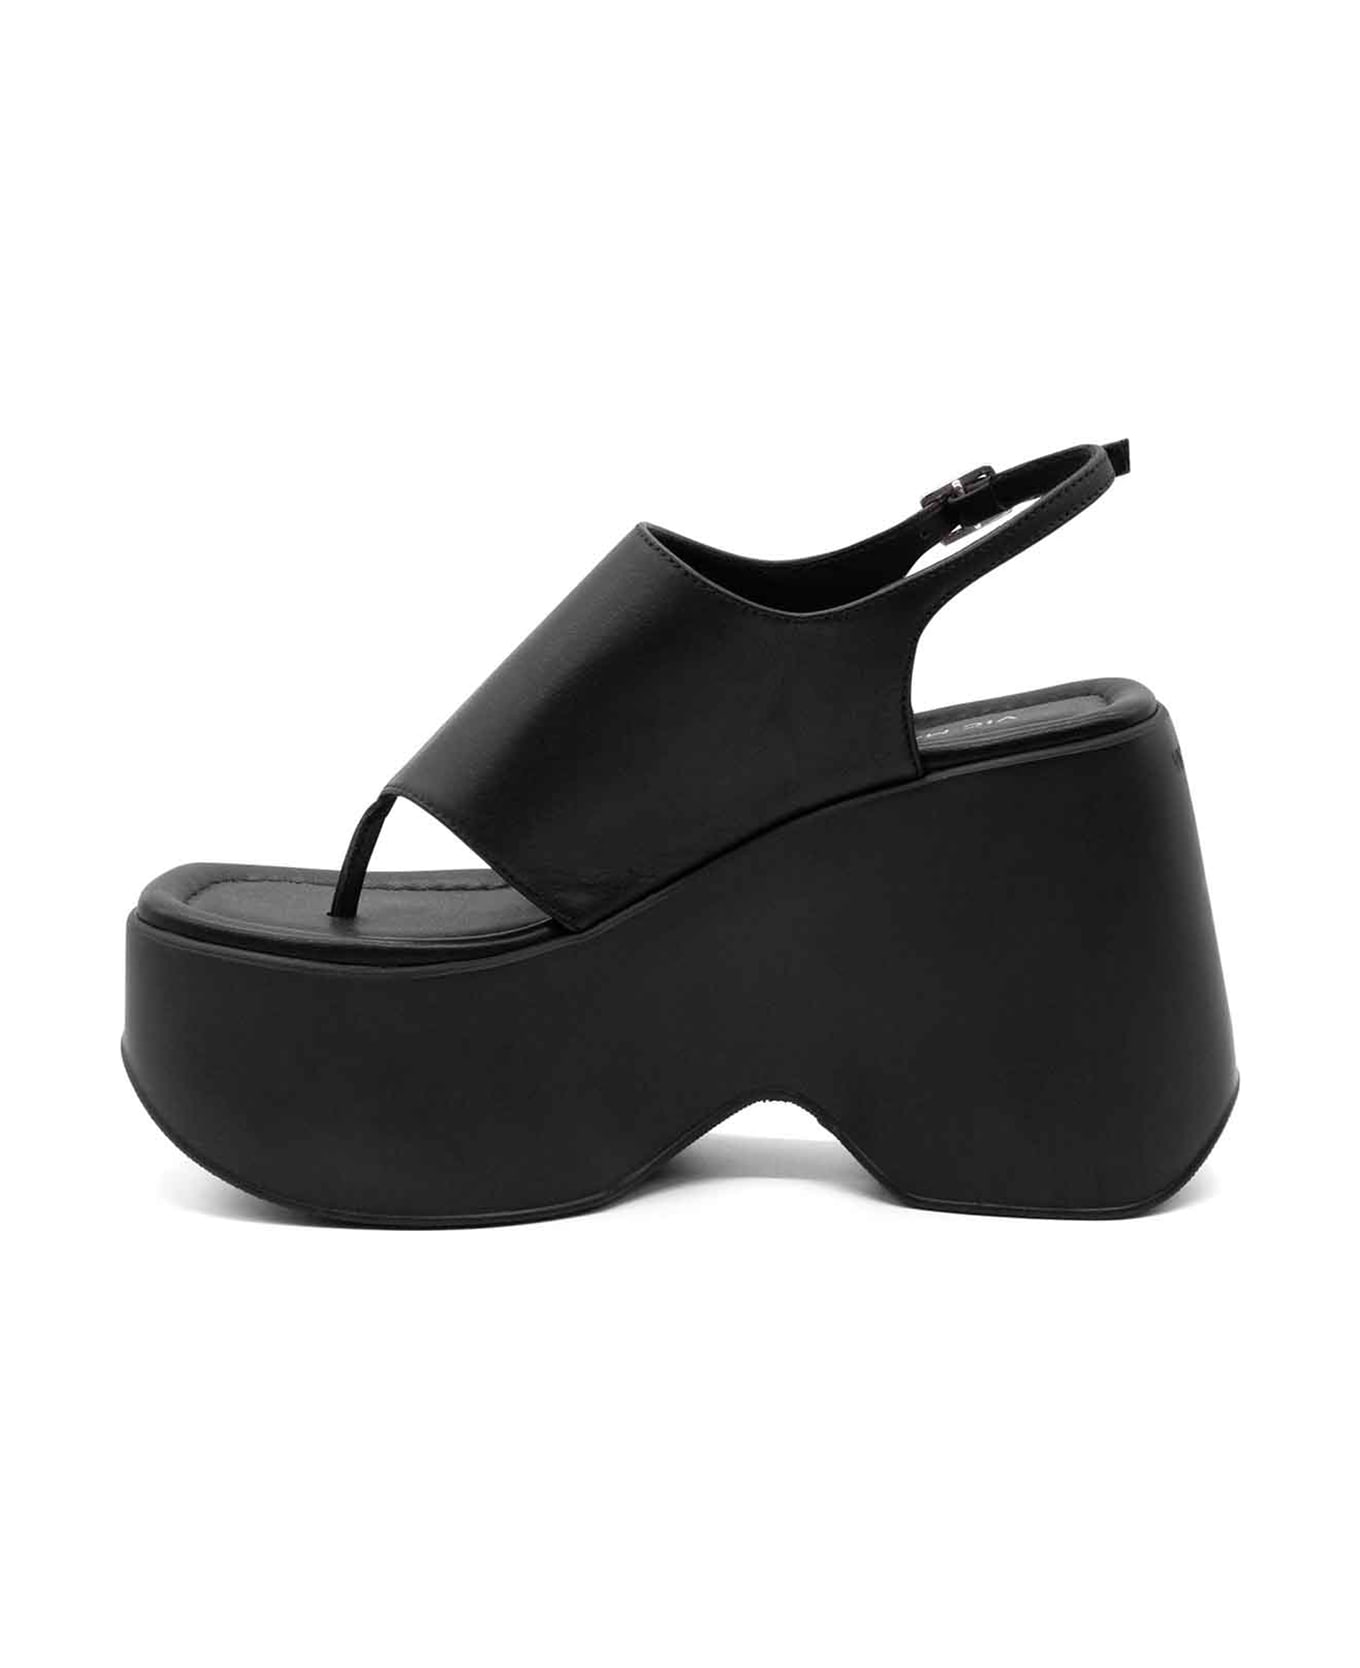 Vic Matié Black Leather Flip-flops With Wedge - NERO